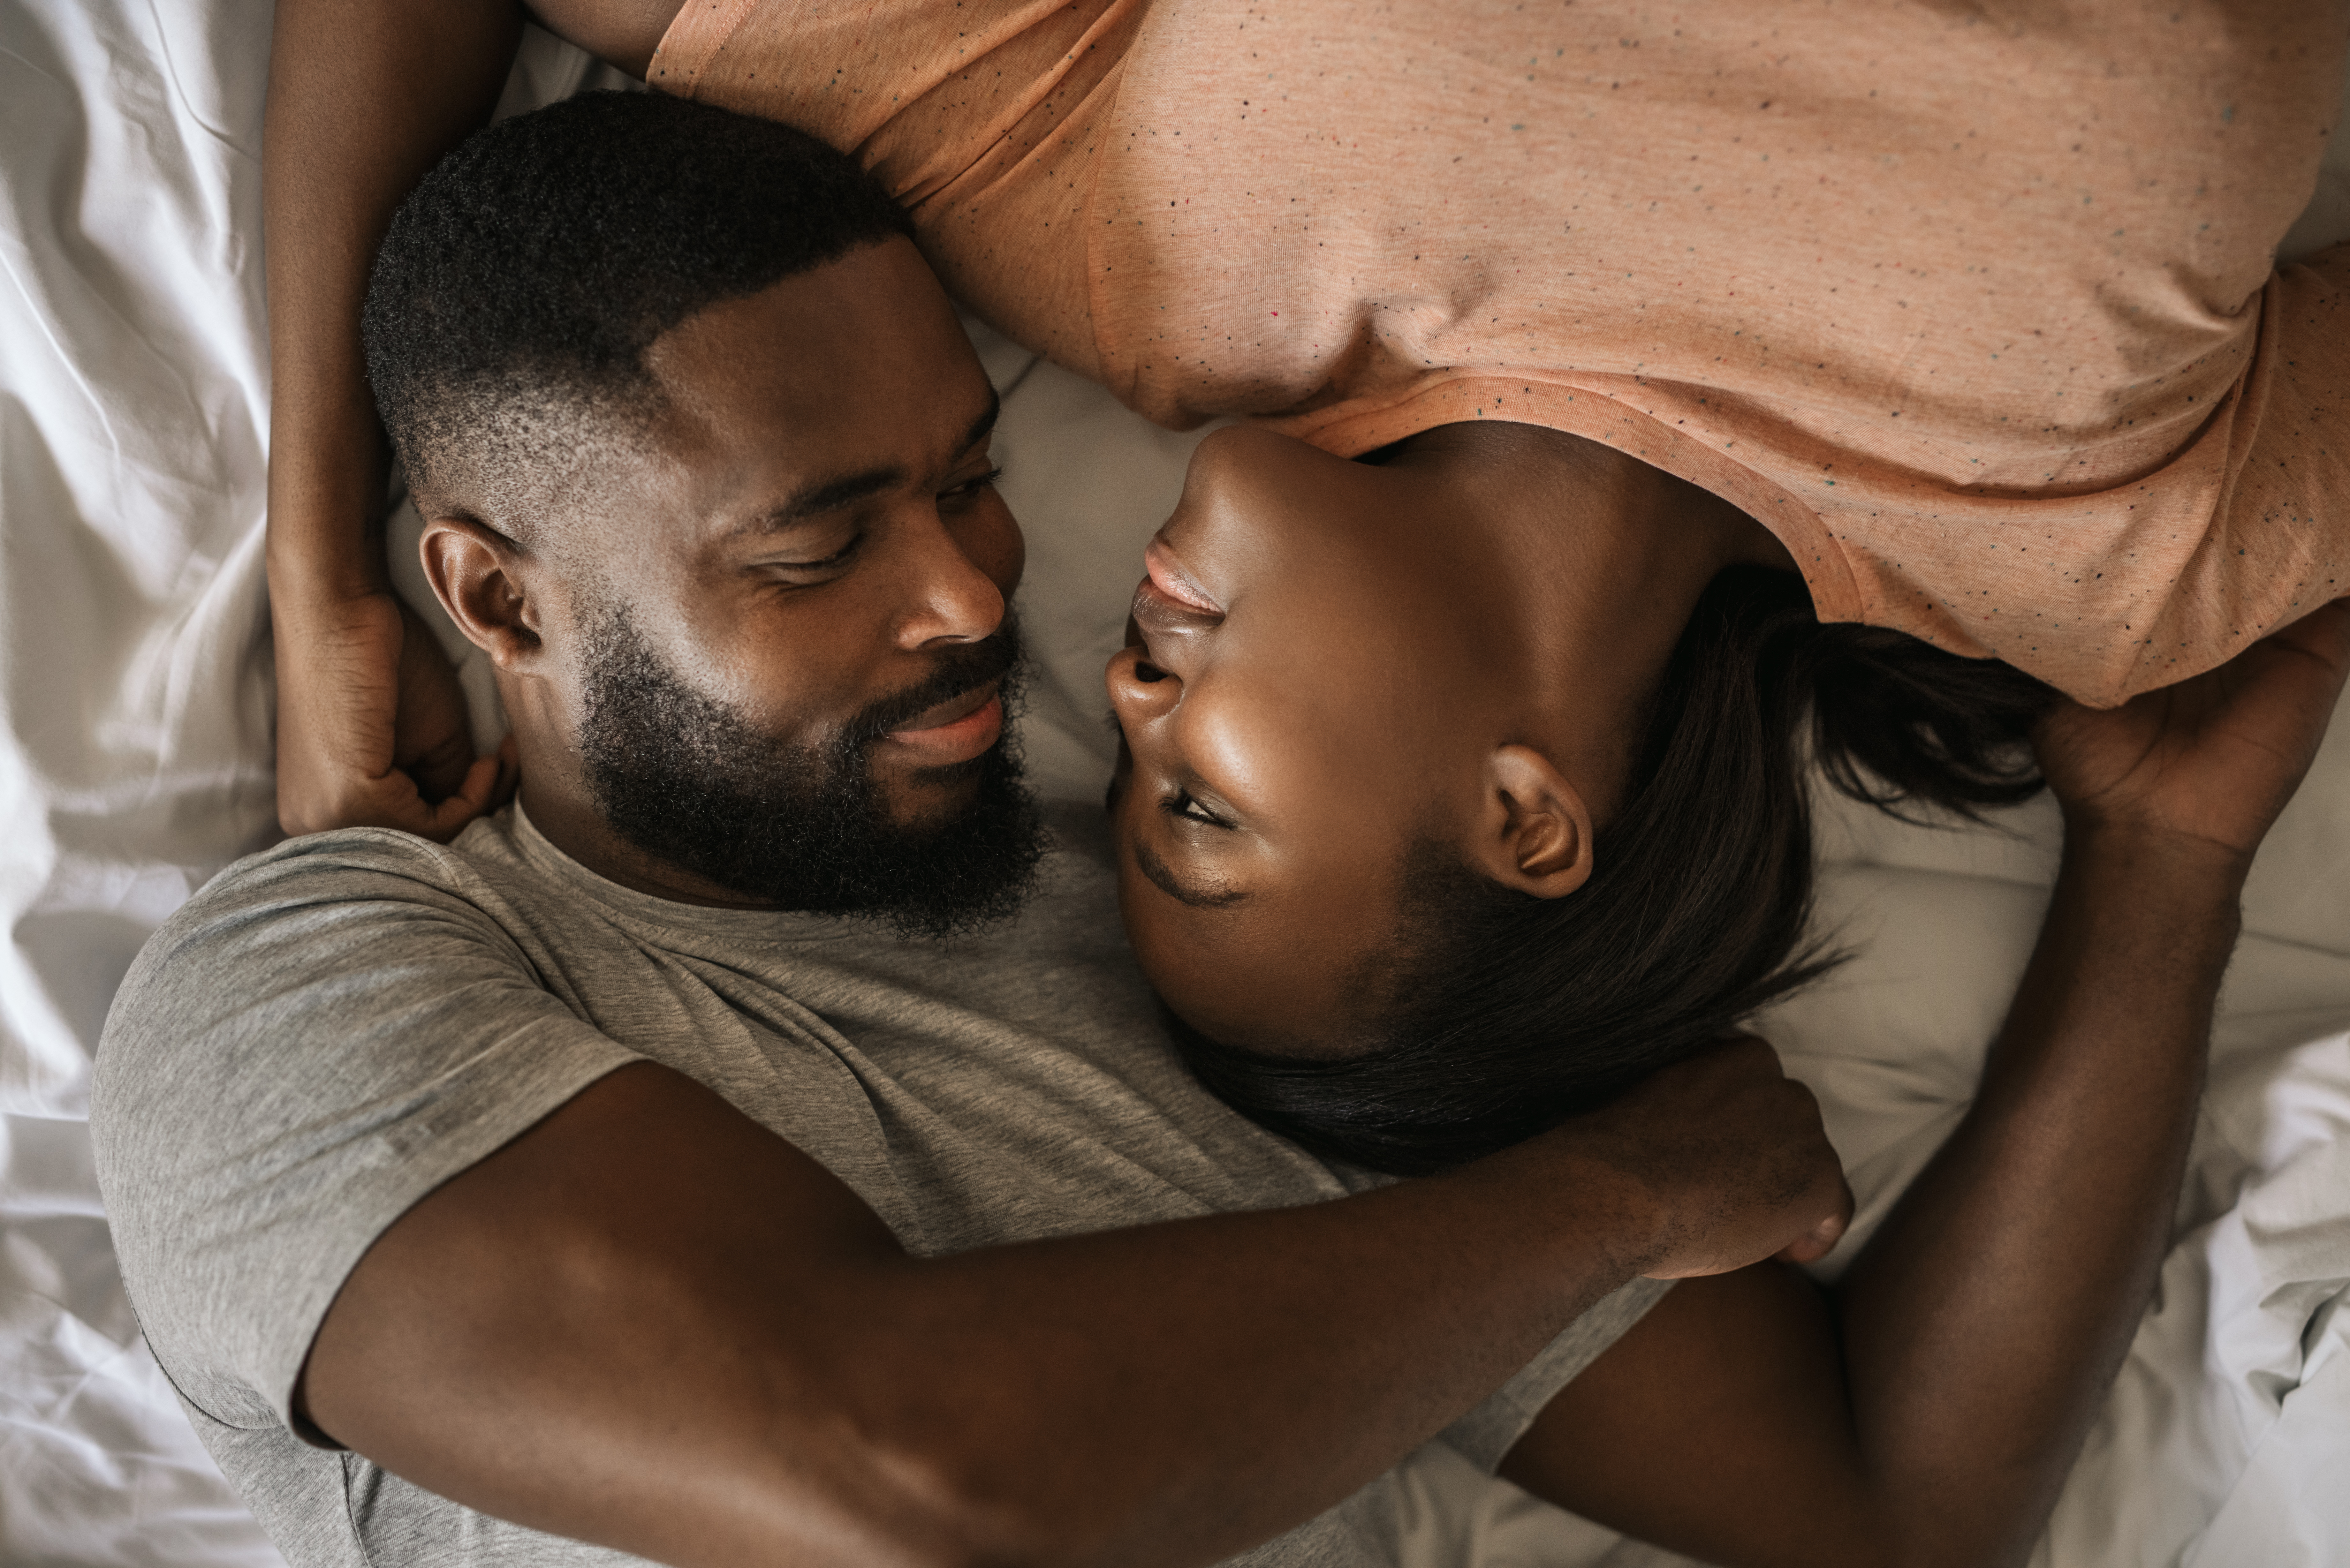 A young couple spending quality in bed | Source: Shutterstock